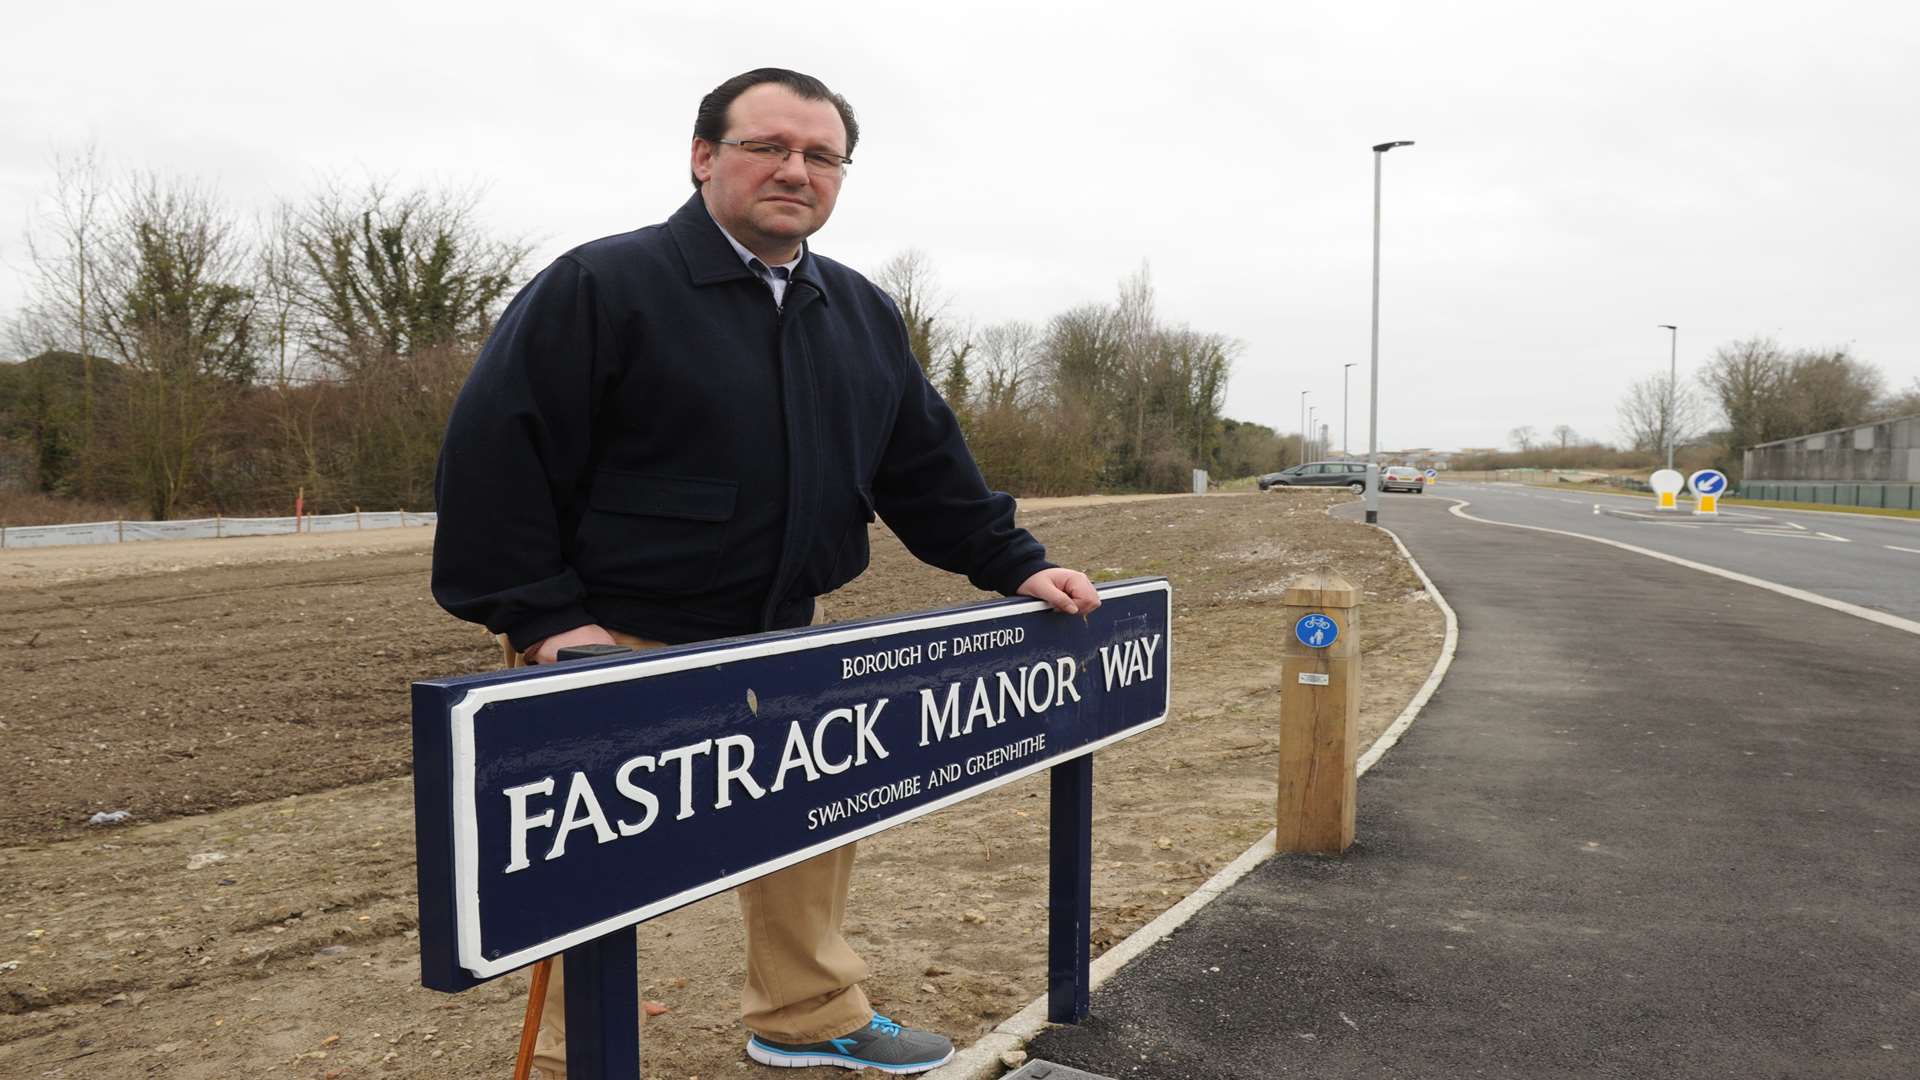 Cllr Keith Kelly is backing the campaign to rename Fastrack Manor Way in honour of the Tiltman family